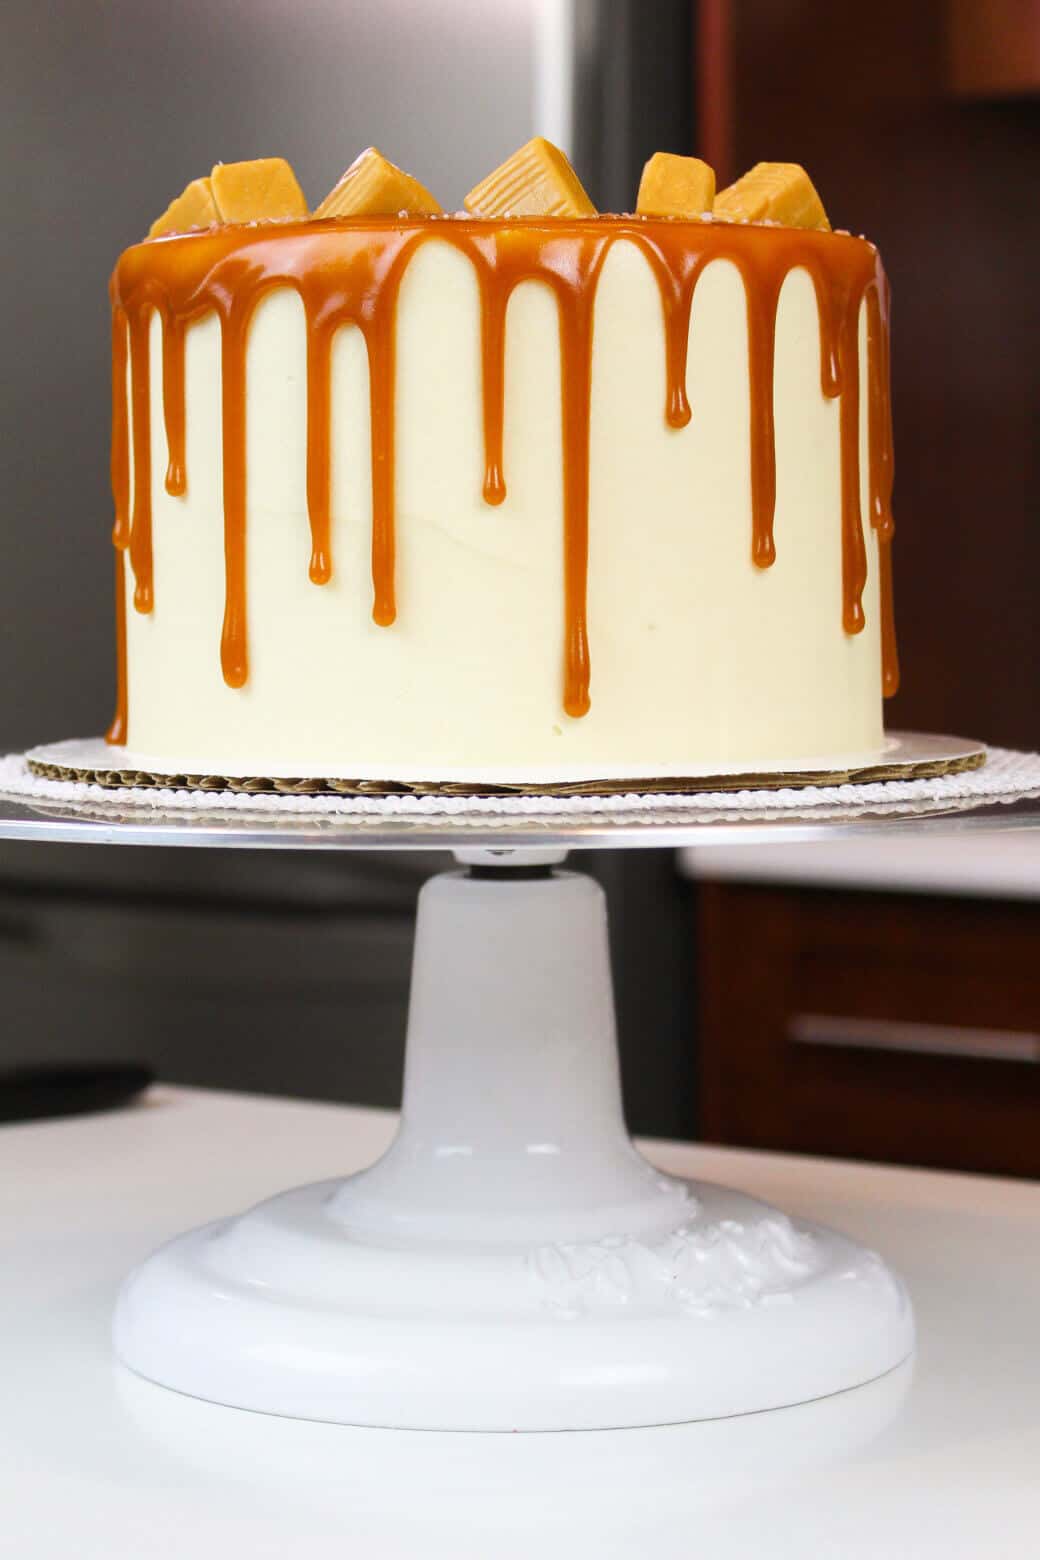 Salted Caramel Layer Cake Delicious From Scratch Recipe 